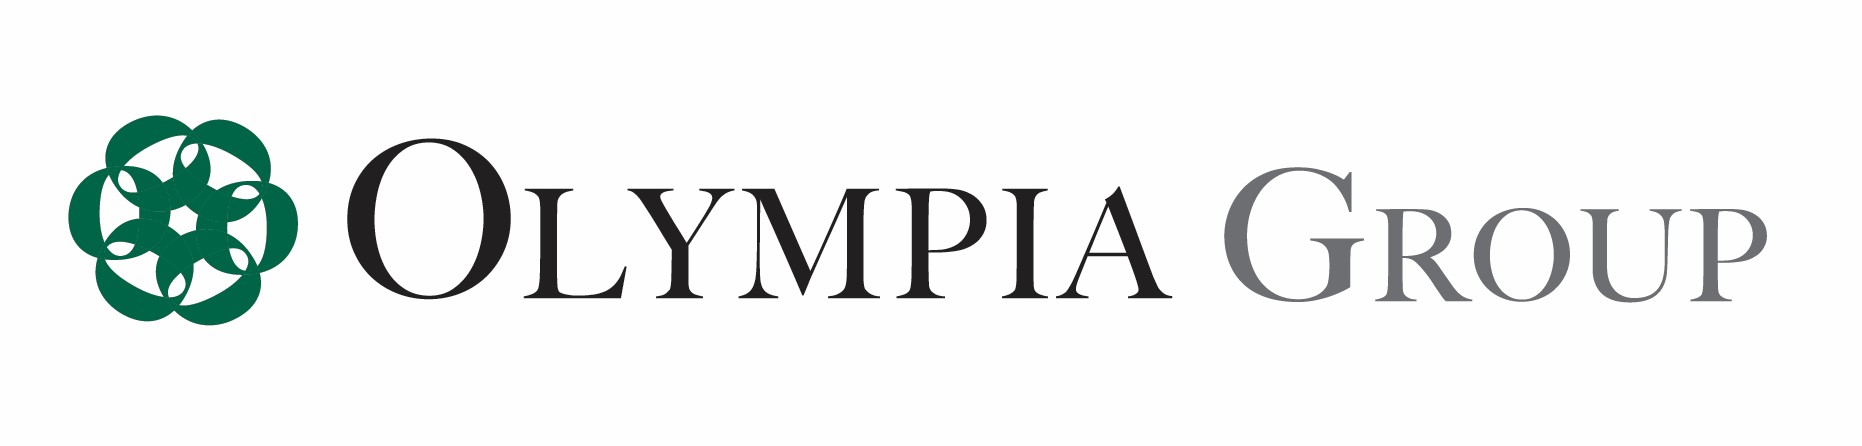 OLYMPIA GROUP